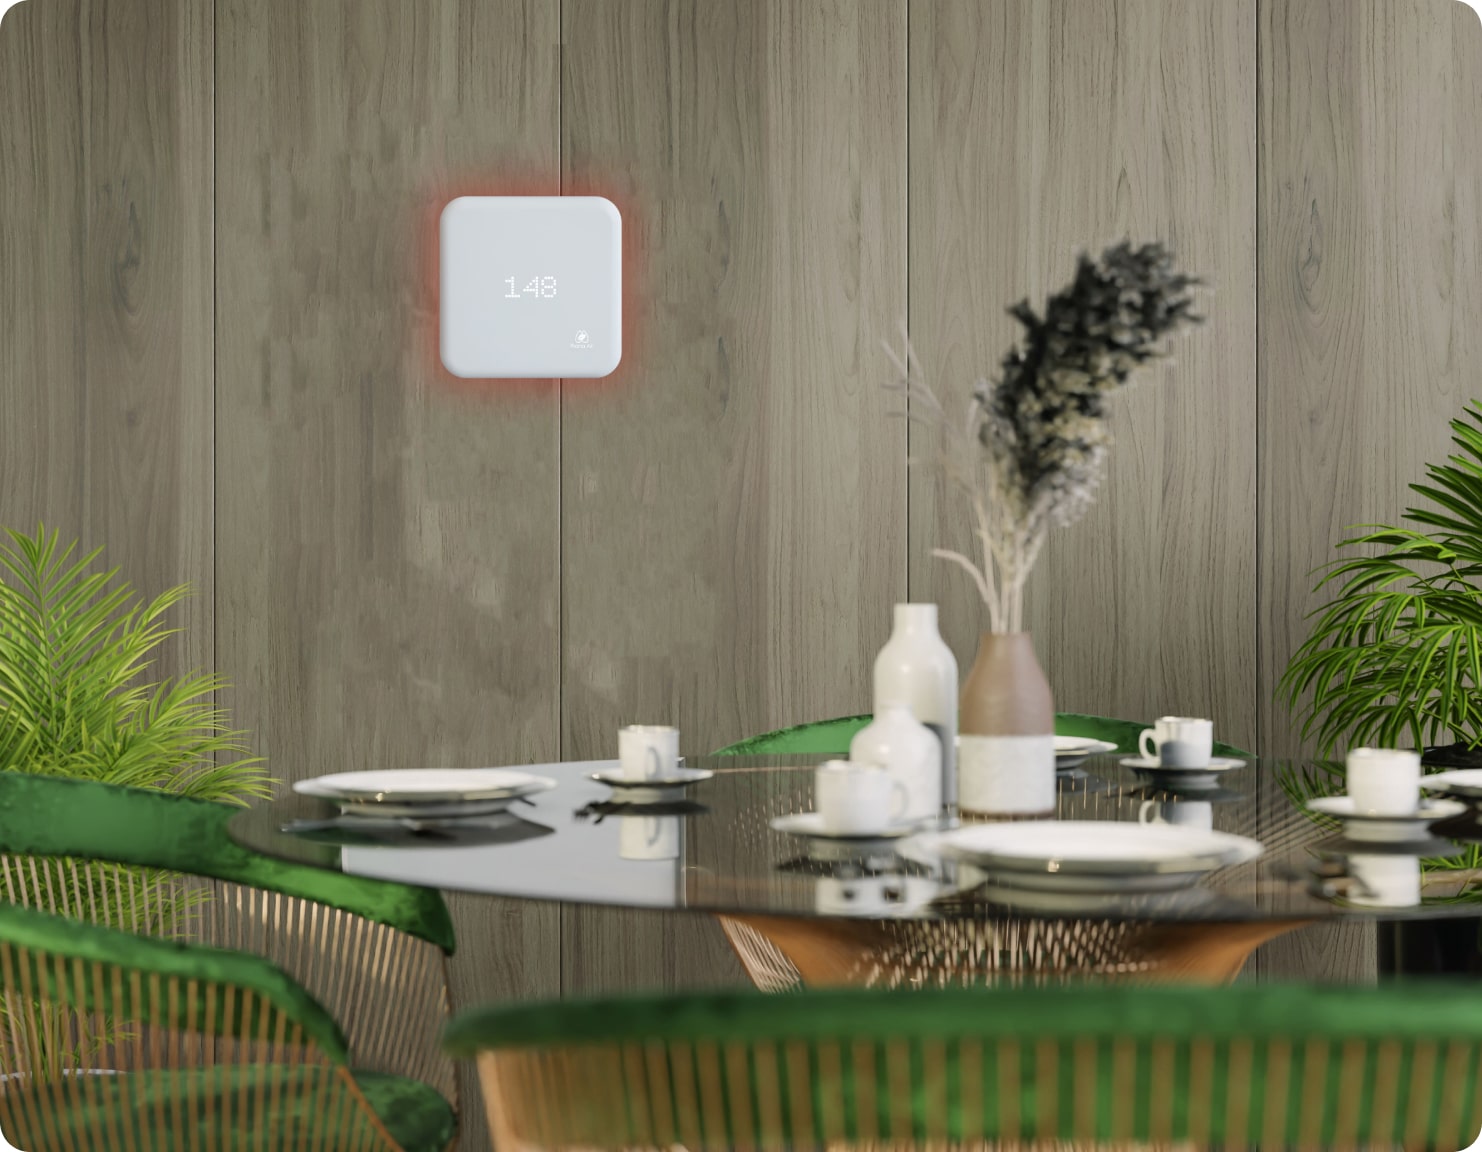 prana air squair monitor as the air quality solutions for restaurant or cafe